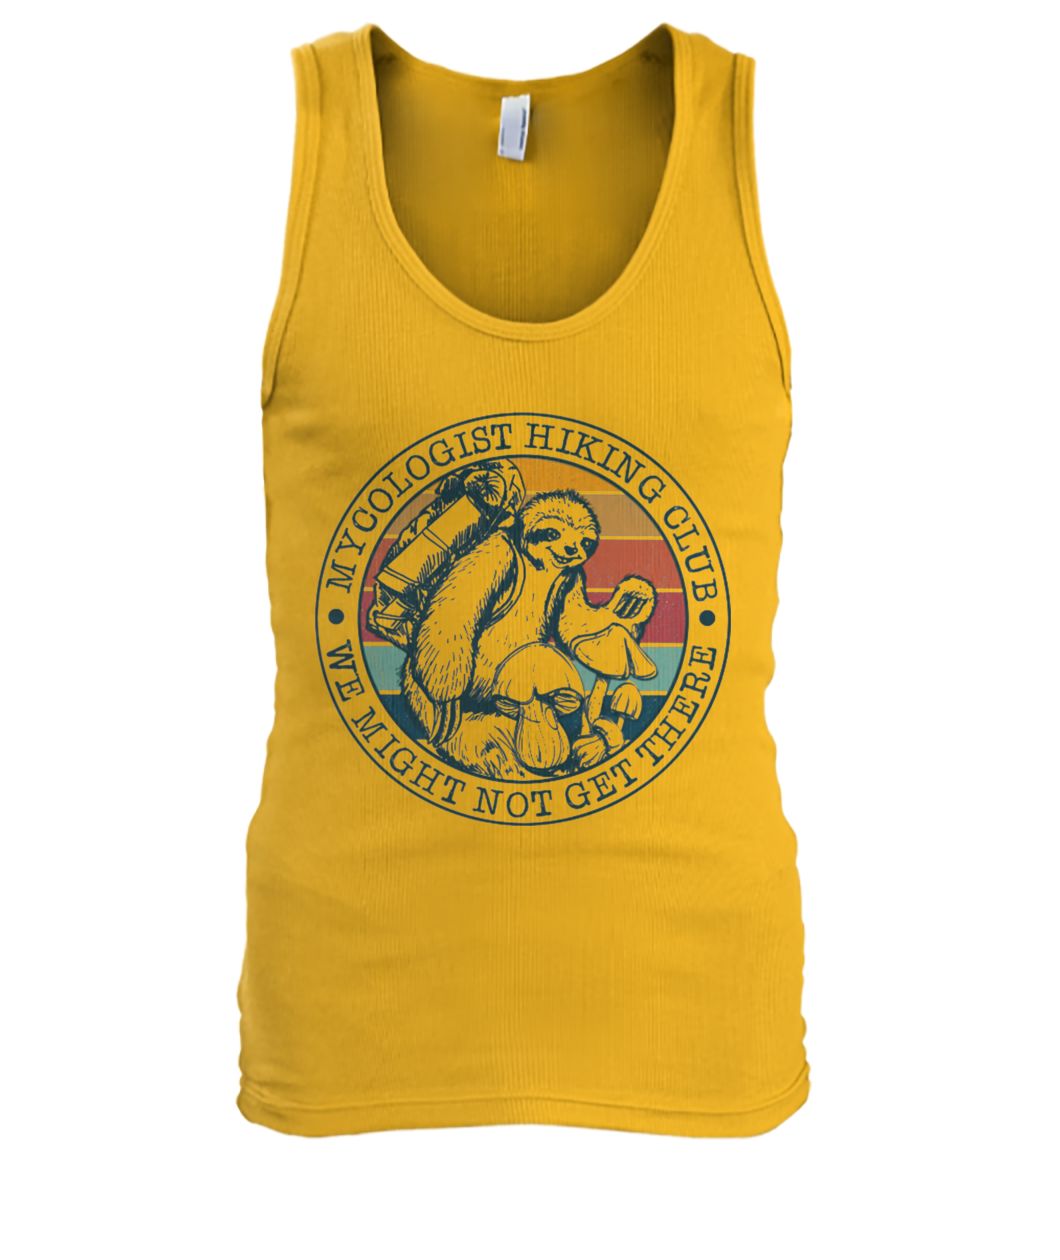 Mycologist hiking club we might not get there sloth men's tank top